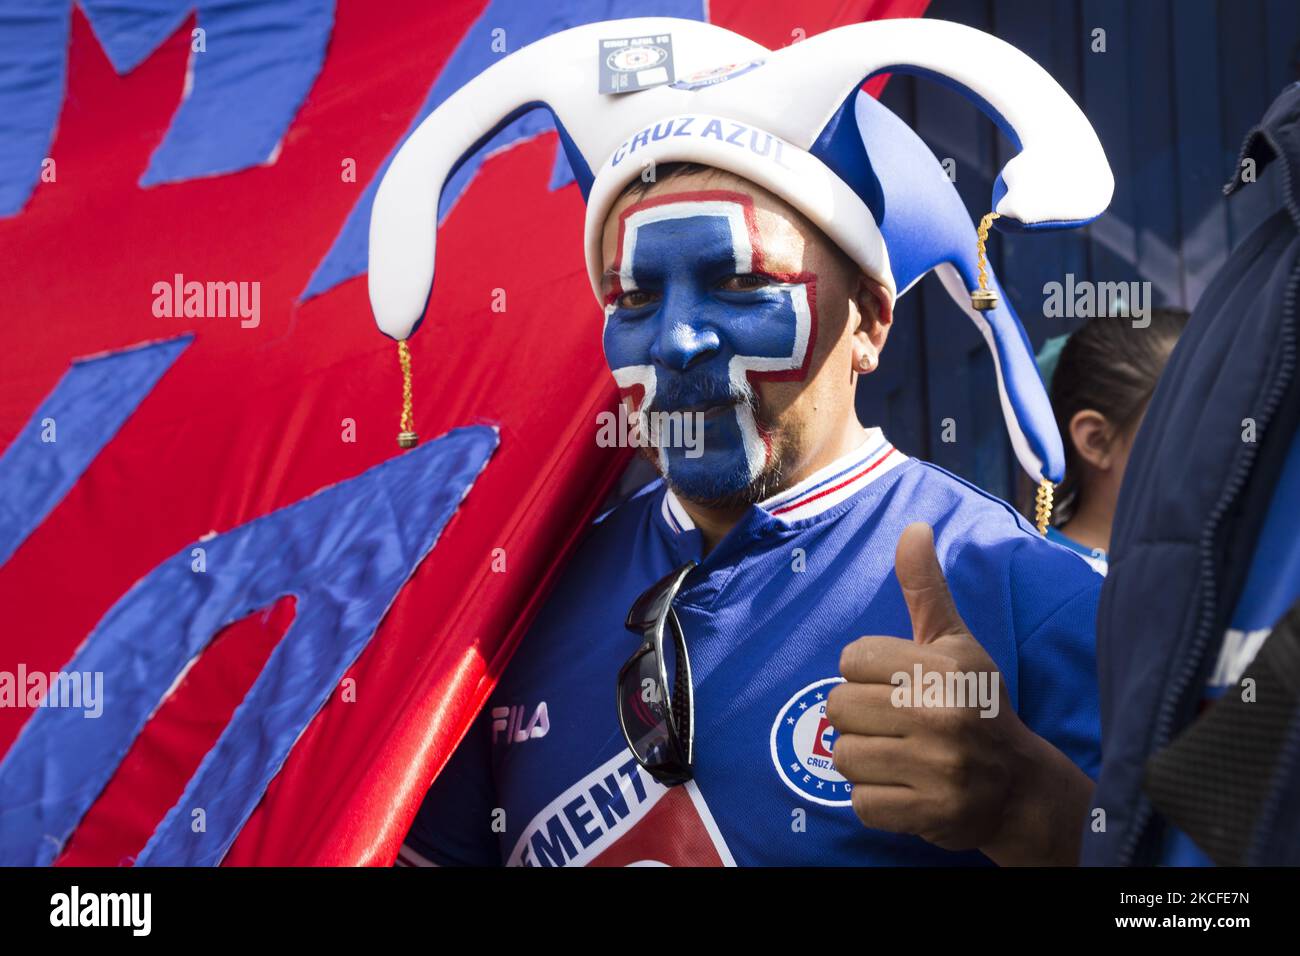 Cruz Azul fans arrive to the Azteca Stadium in Mexico City, Mexico on May 30, 2021 to recibe the players and witness the final of the Mx League, in which the capital's team beat Santos Laguna. With this triumph Cruz Azul breaks a 23-year streak without raising the cup. (Photo by Cristian Leyva/NurPhoto) Stock Photo